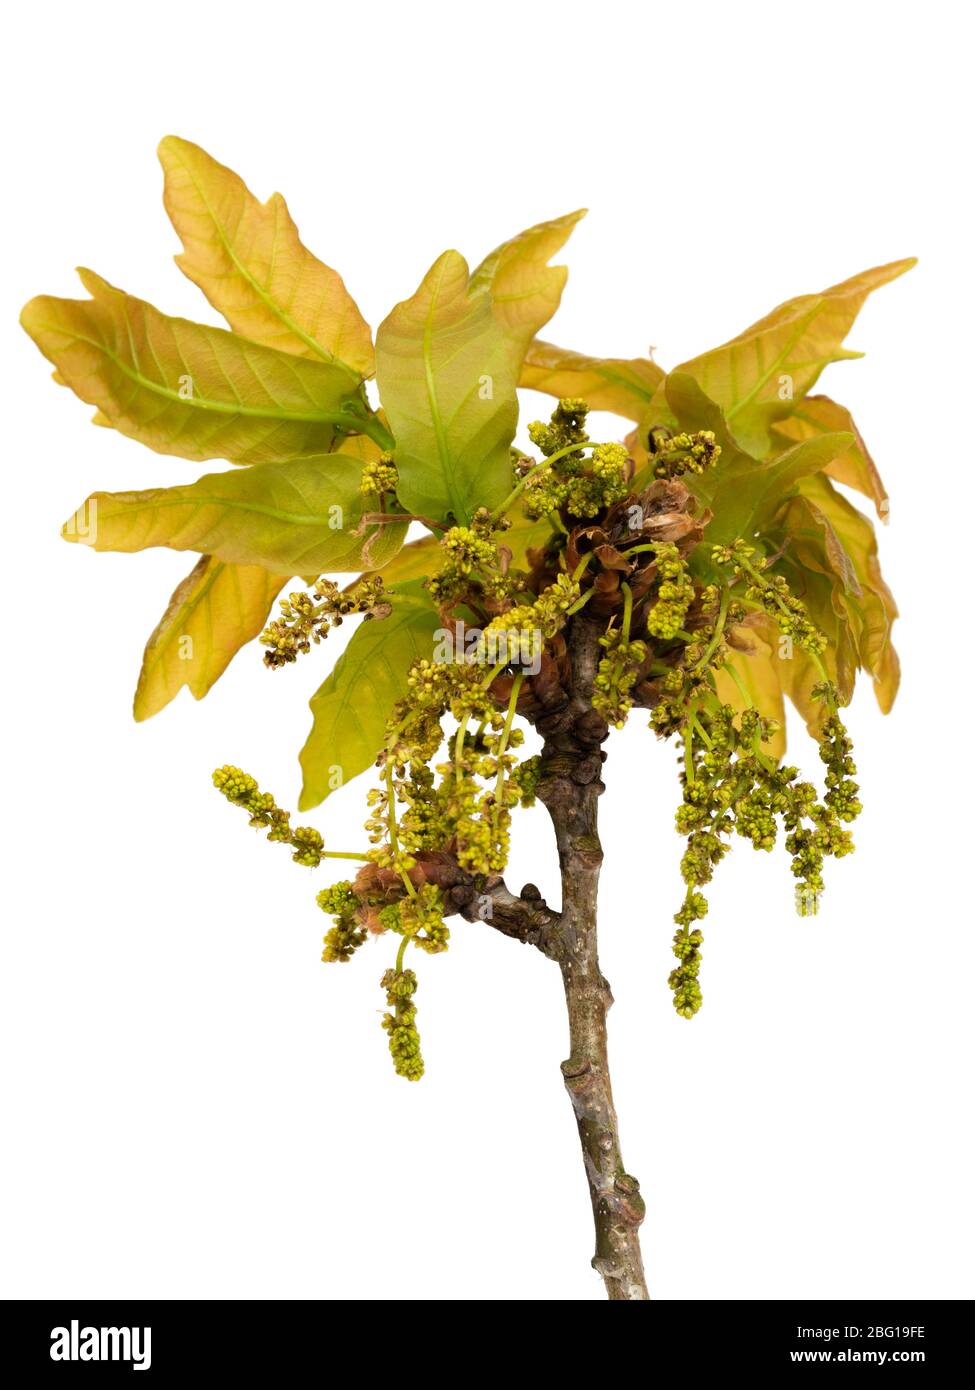 Wind pollinated spring flowers and emerging foliage of the pedunculate oak, Quercus robur, on a white background Stock Photo